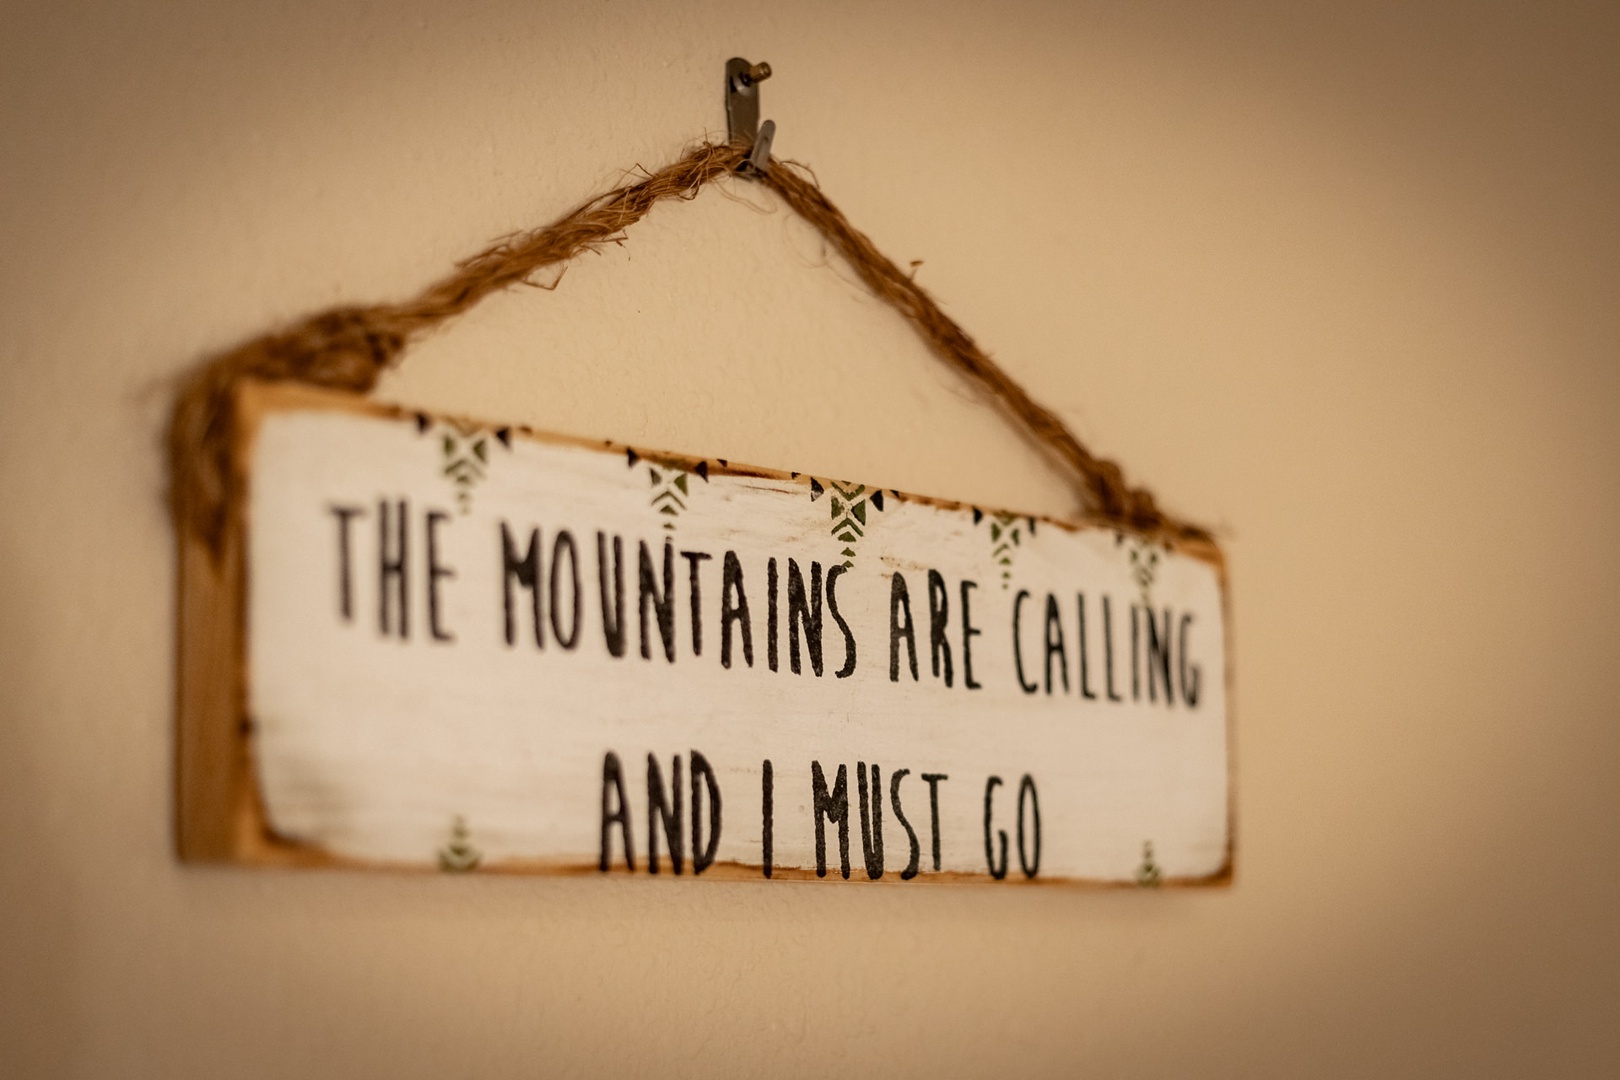 "The mountains are calling and you must go"